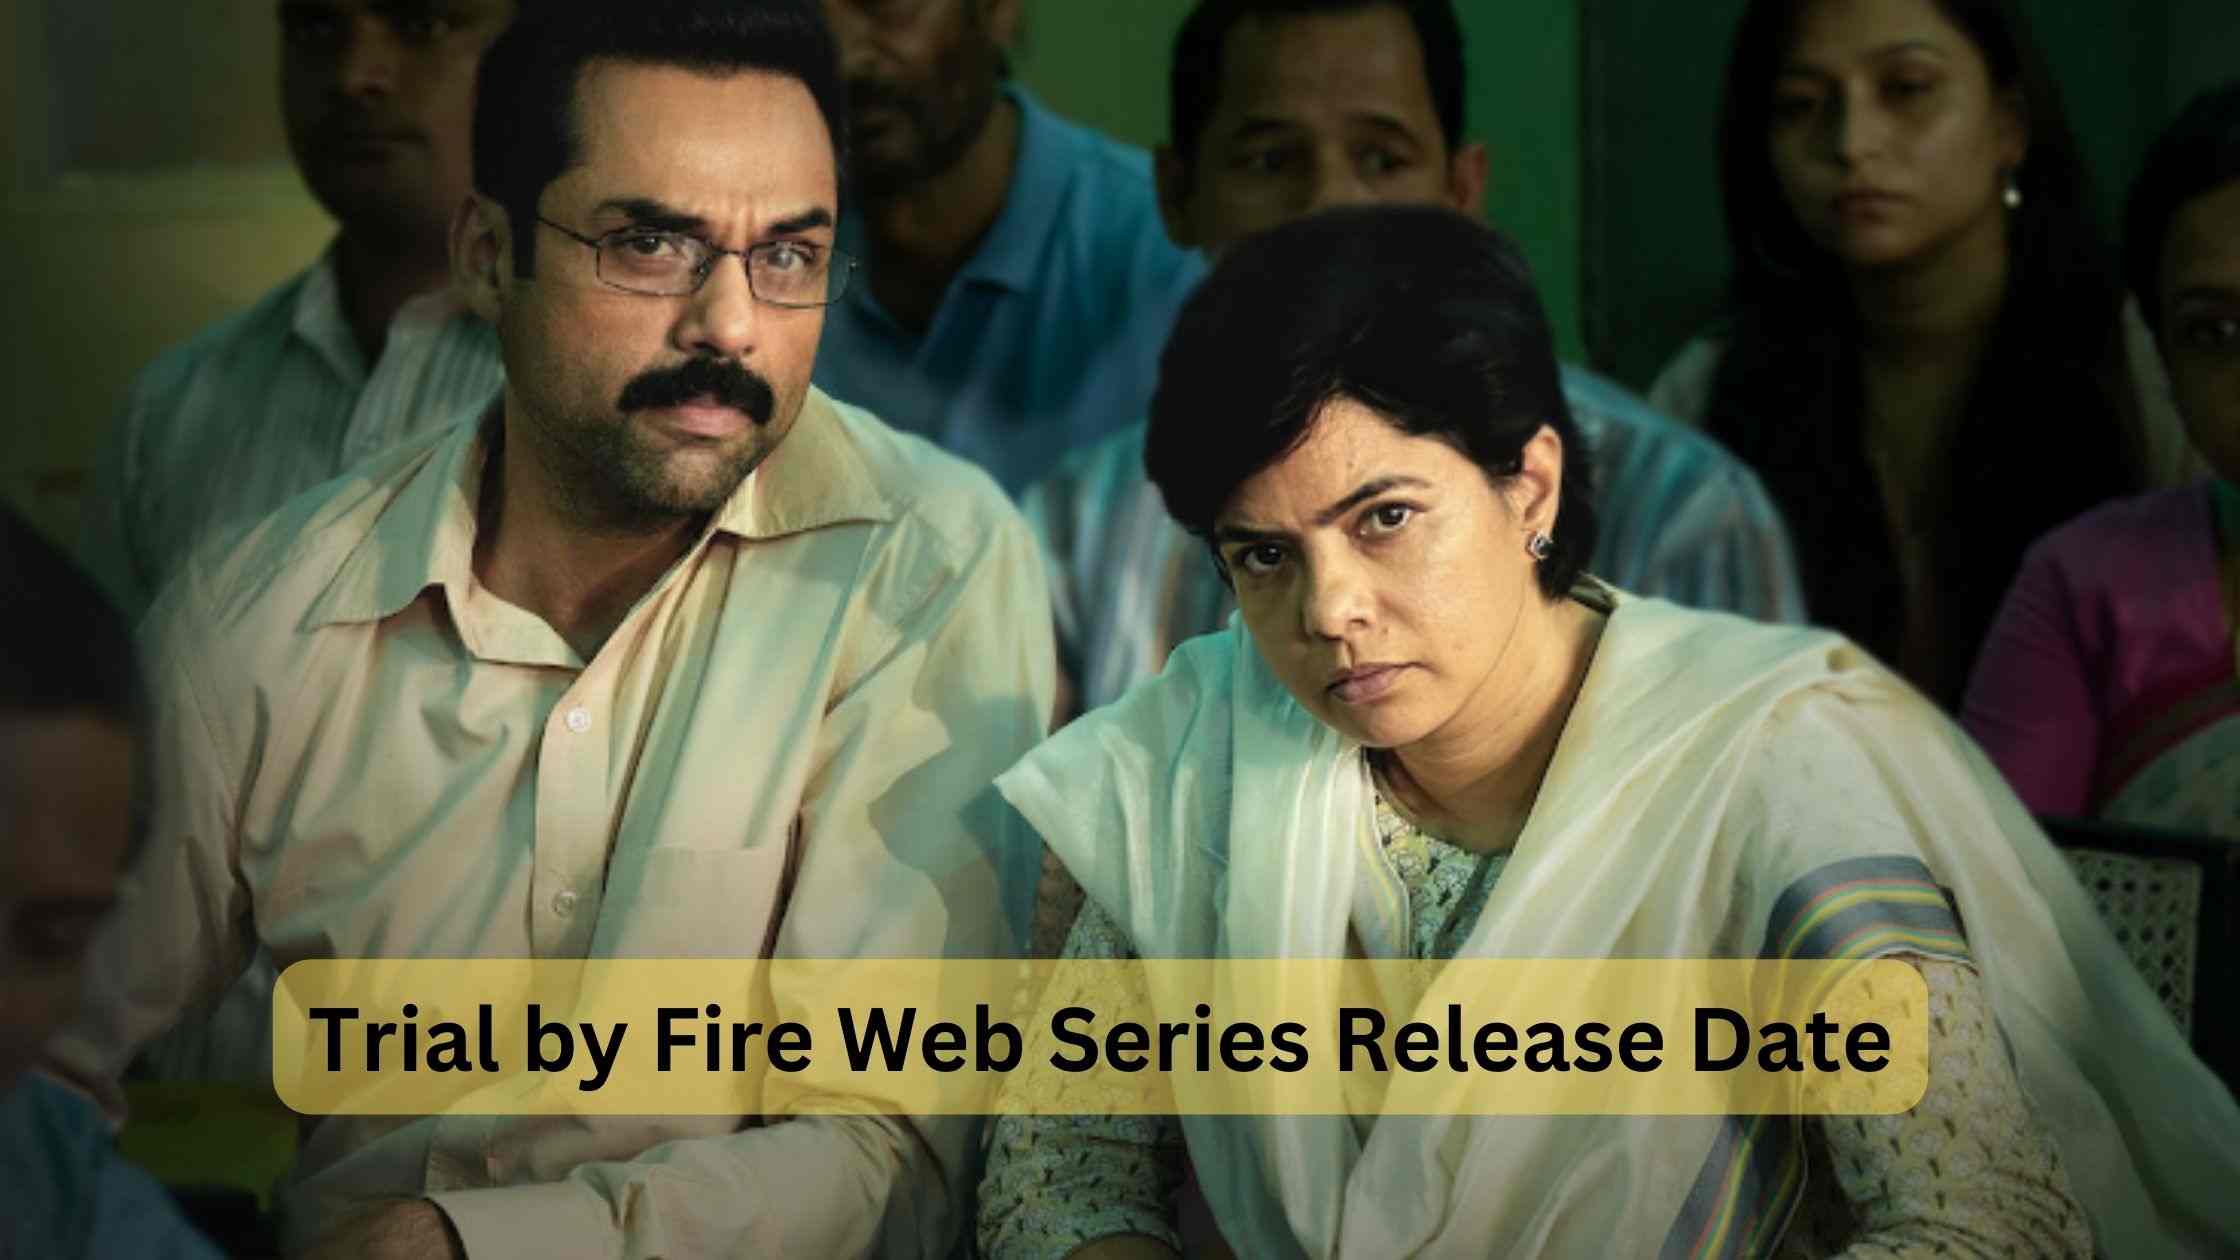 Trial by Fire Web Series Release Date